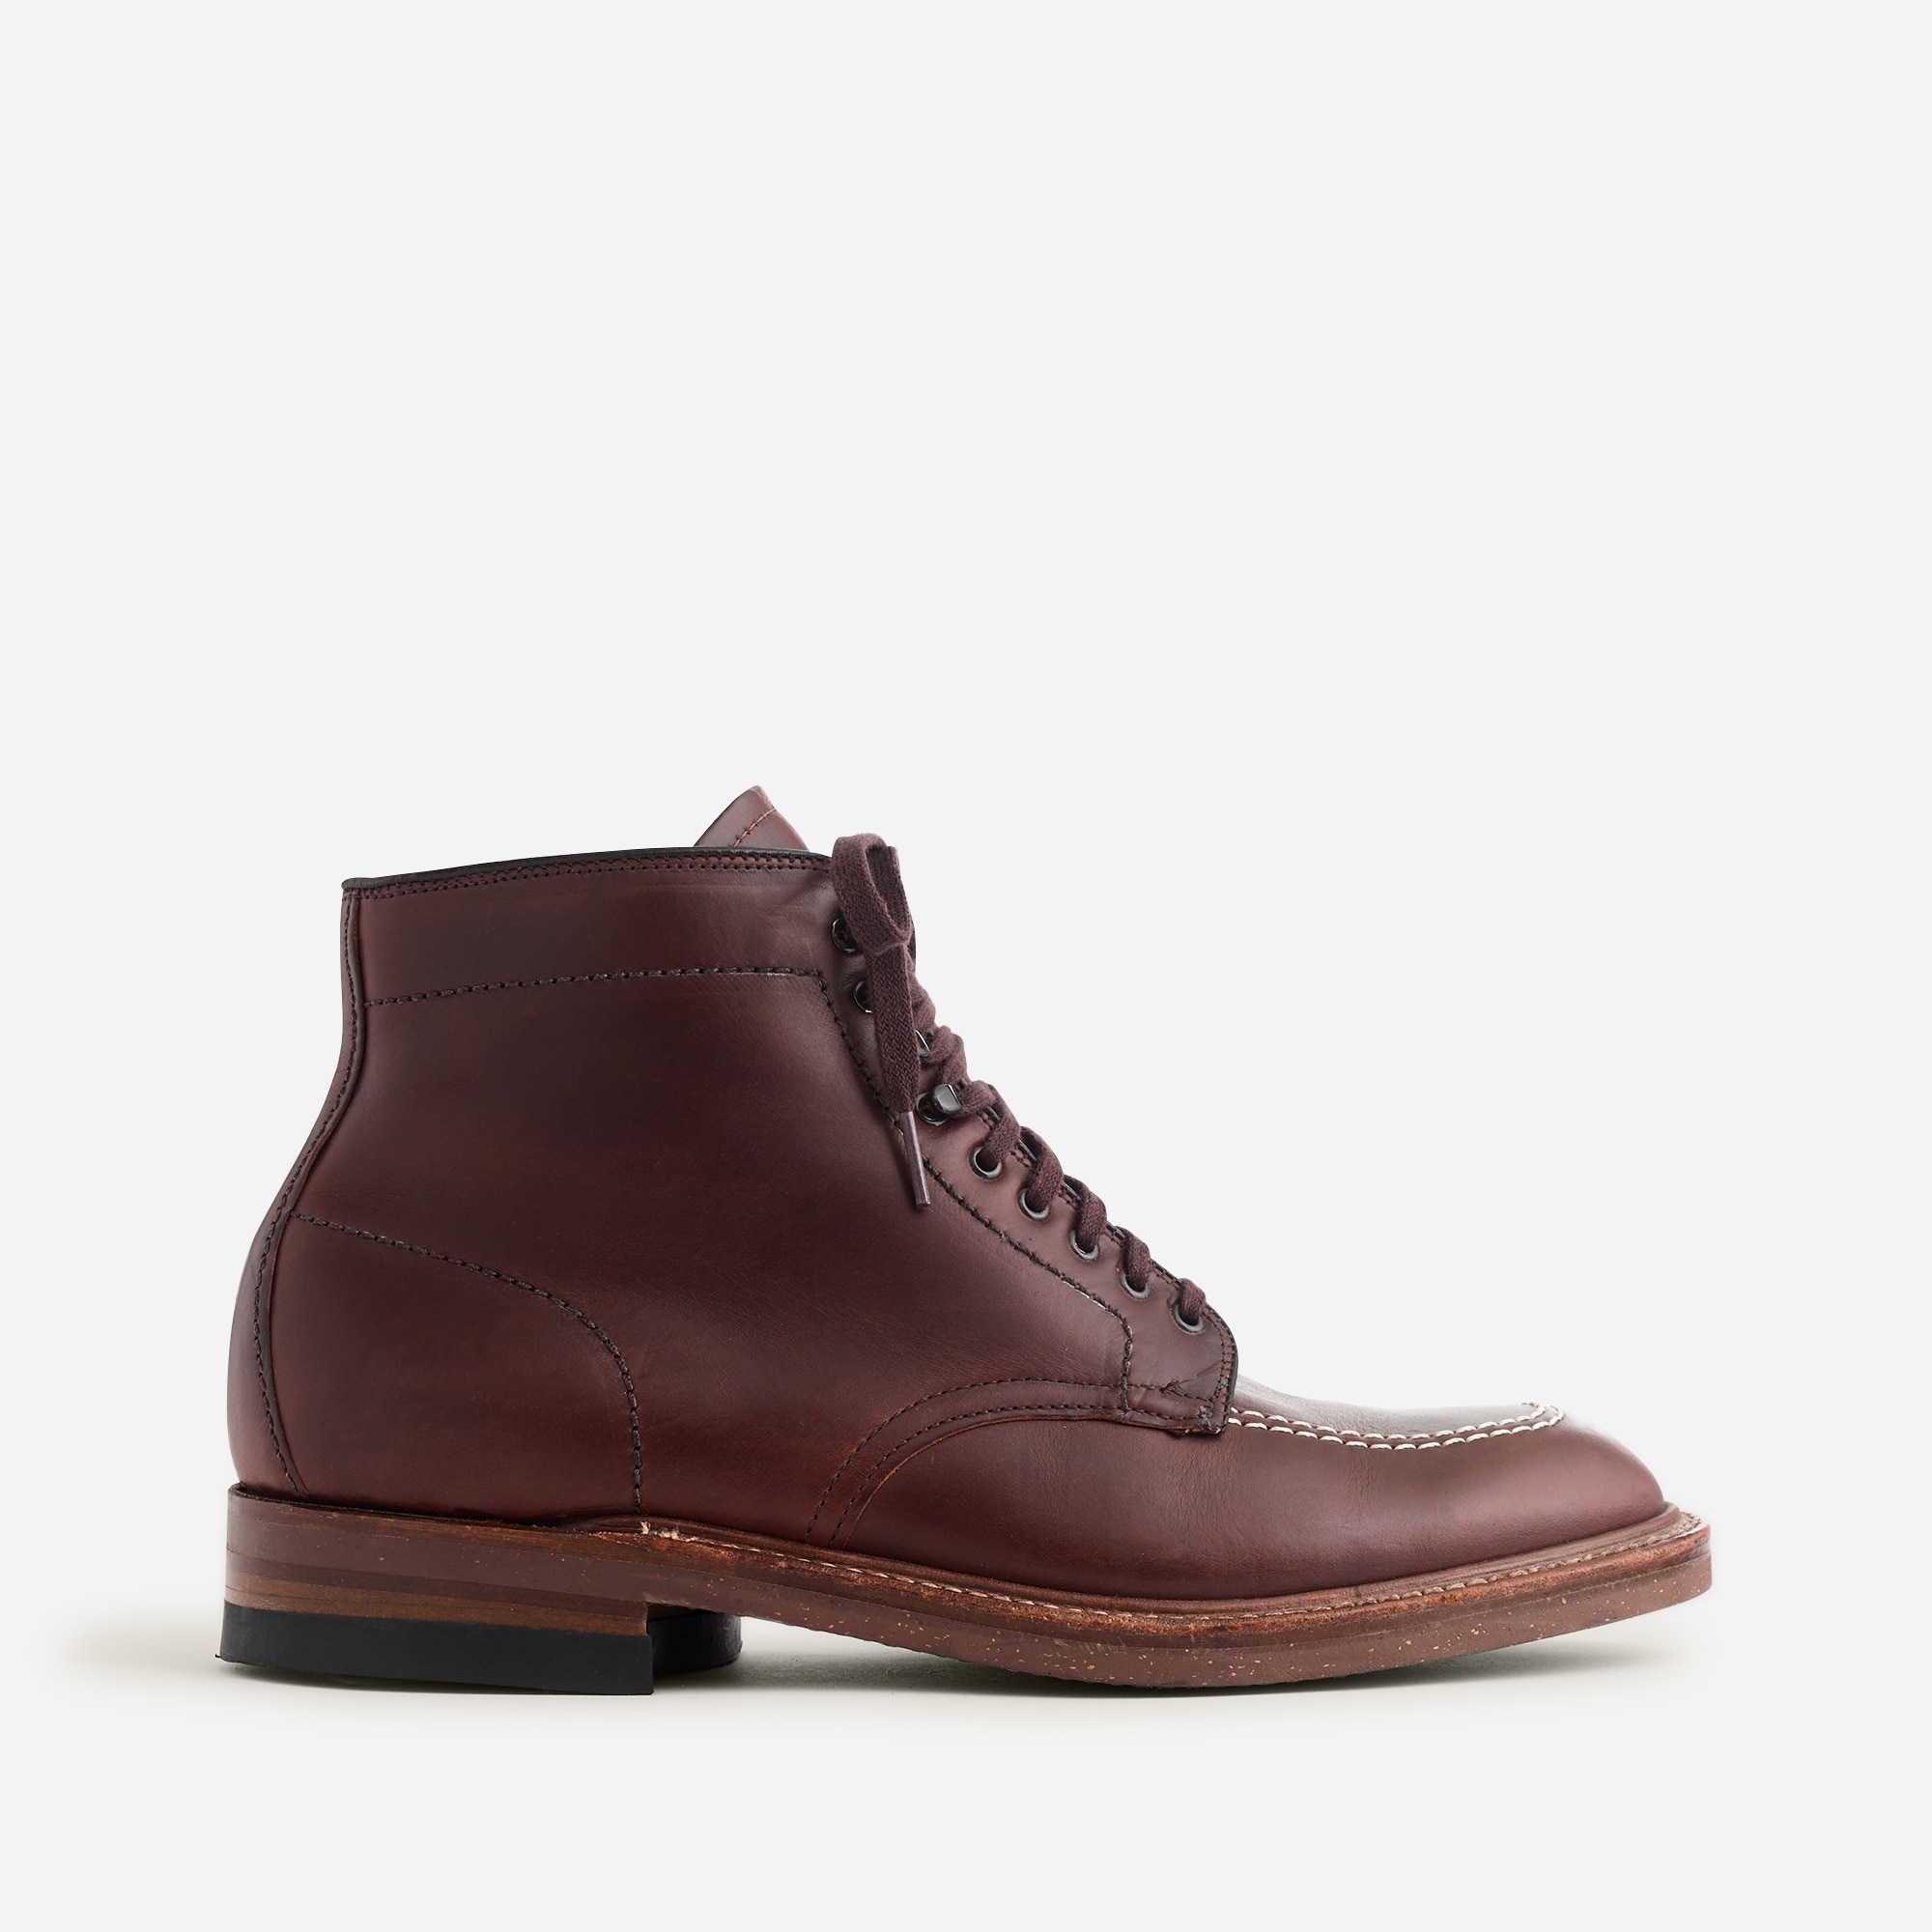 For J.Crew 405 Indy Boots For Men